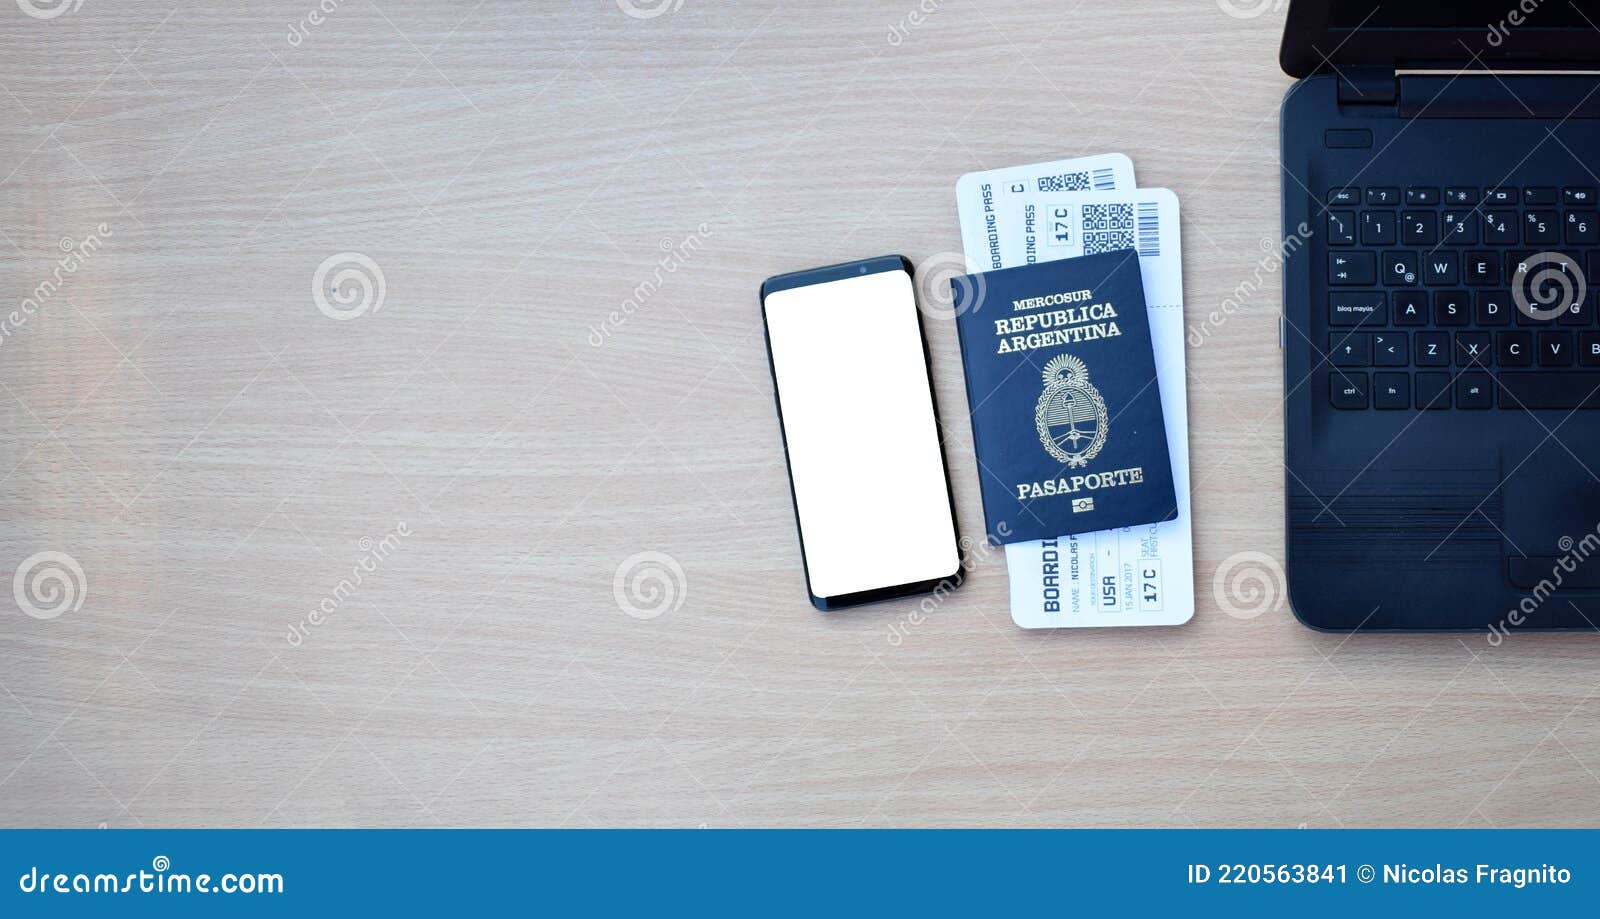 argentine passport and boarding pass with smartphone with copy space on wooden table